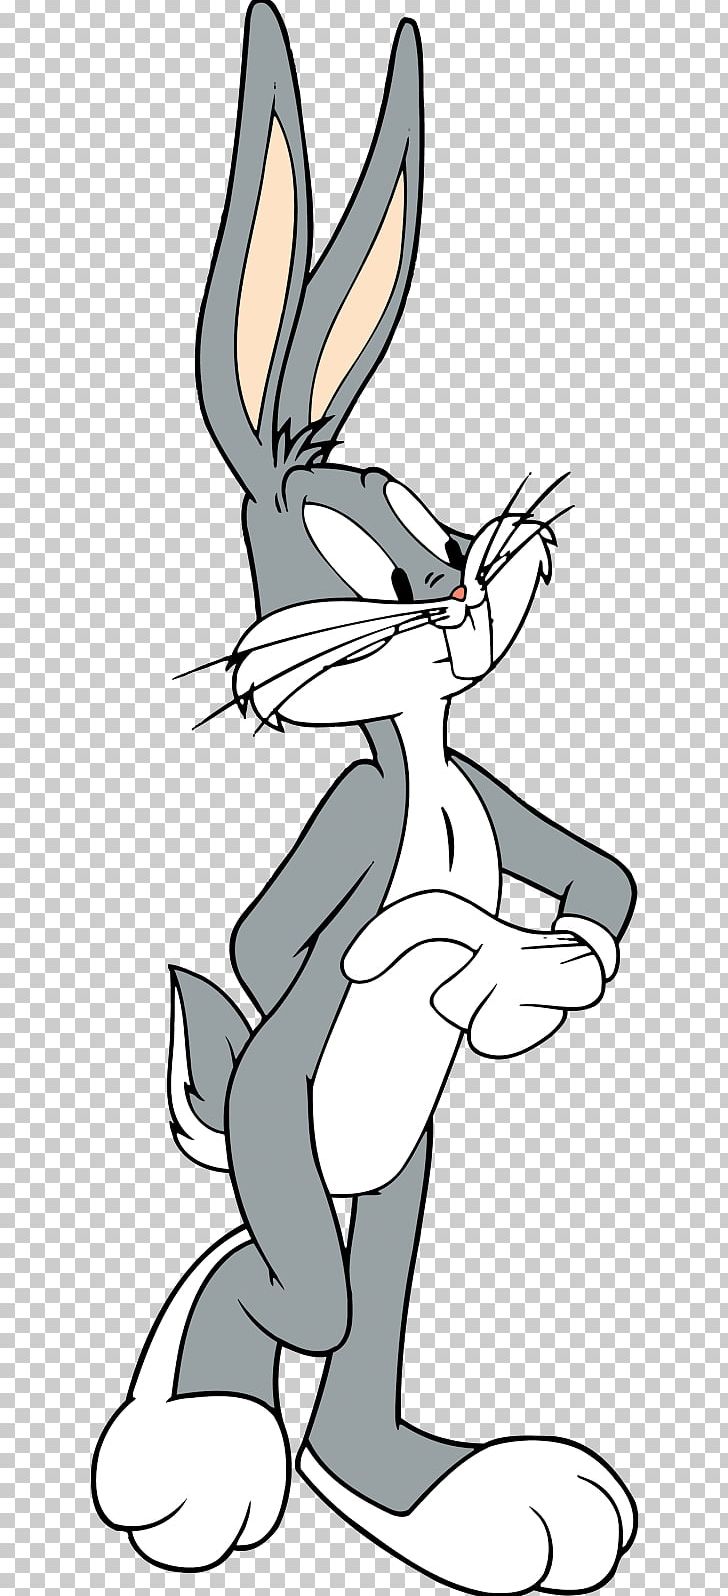 Bugs Bunny Cartoon Looney Tunes PNG, Clipart, Animated Cartoon, Animation, Arm, Art, Artwork Free PNG Download